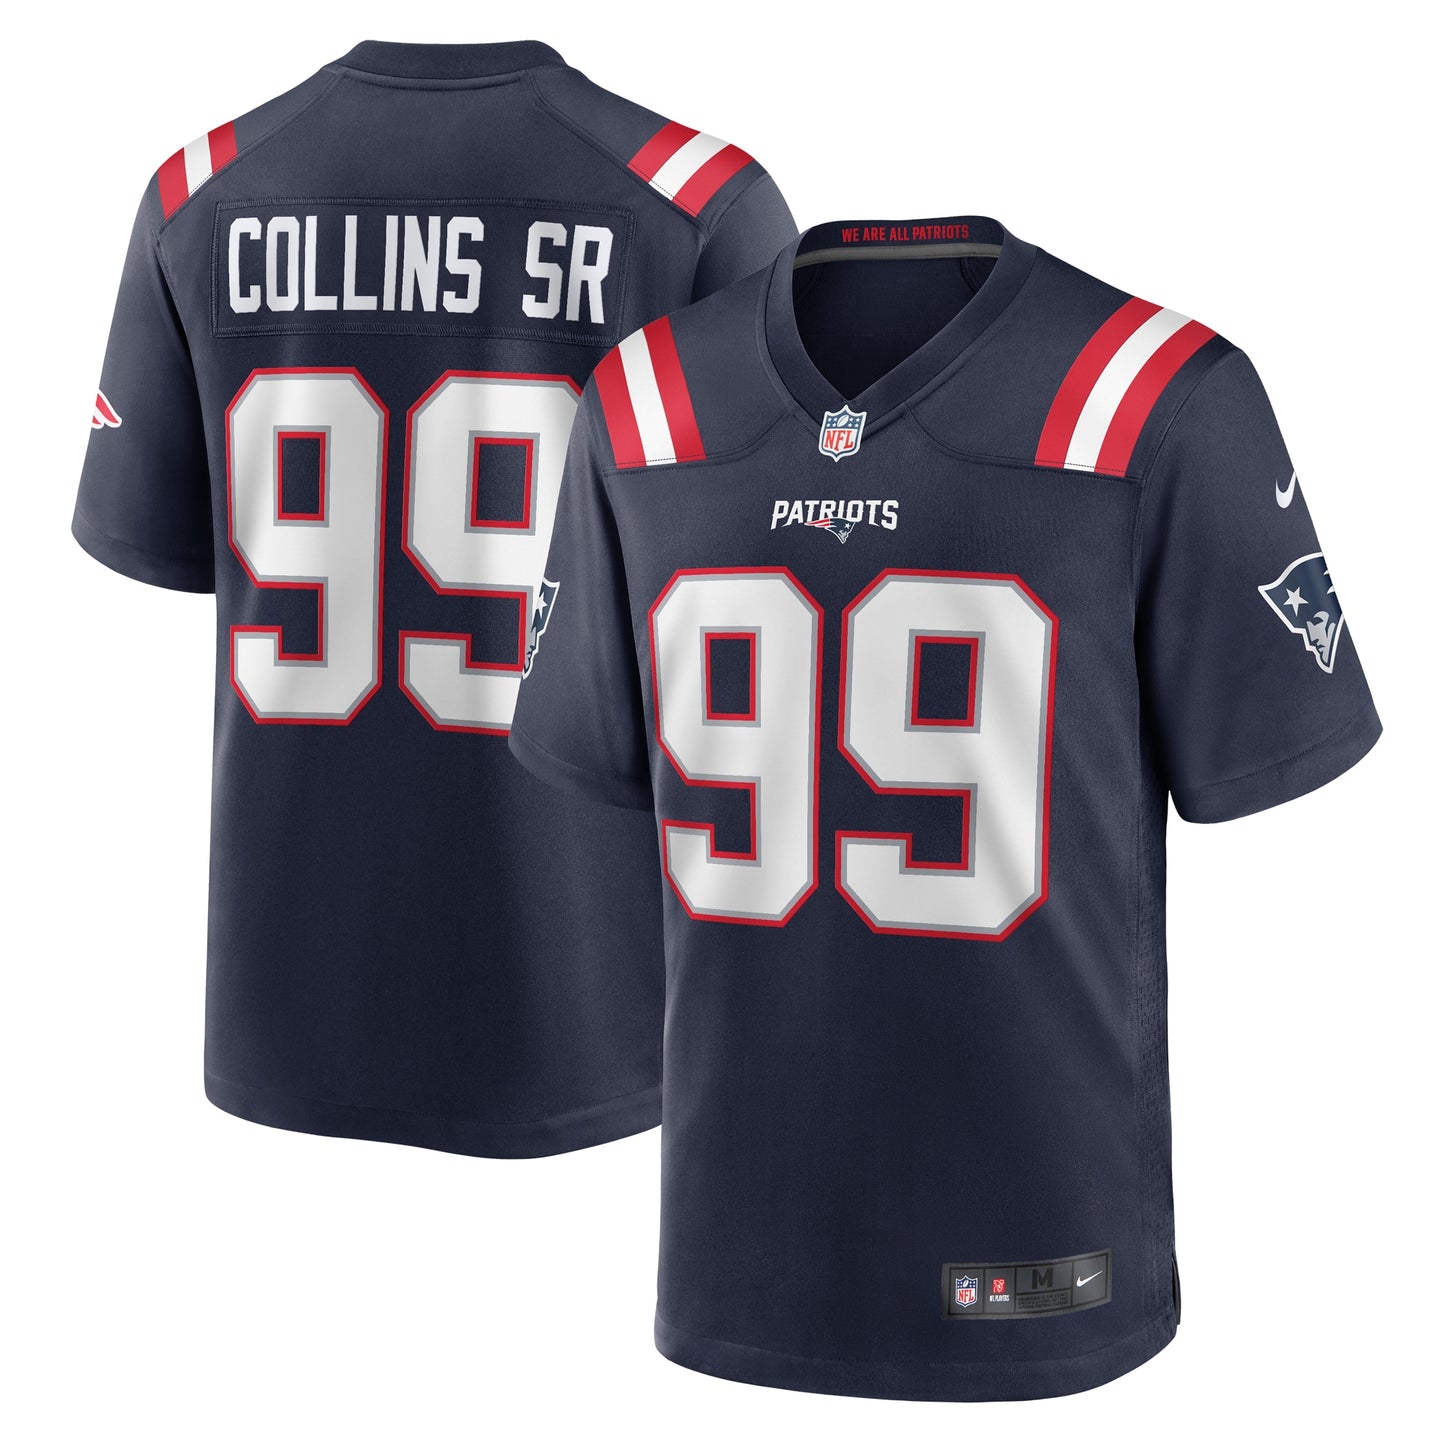 Jamie Collins Sr. New England Patriots Nike Home Game Player Jersey - Navy